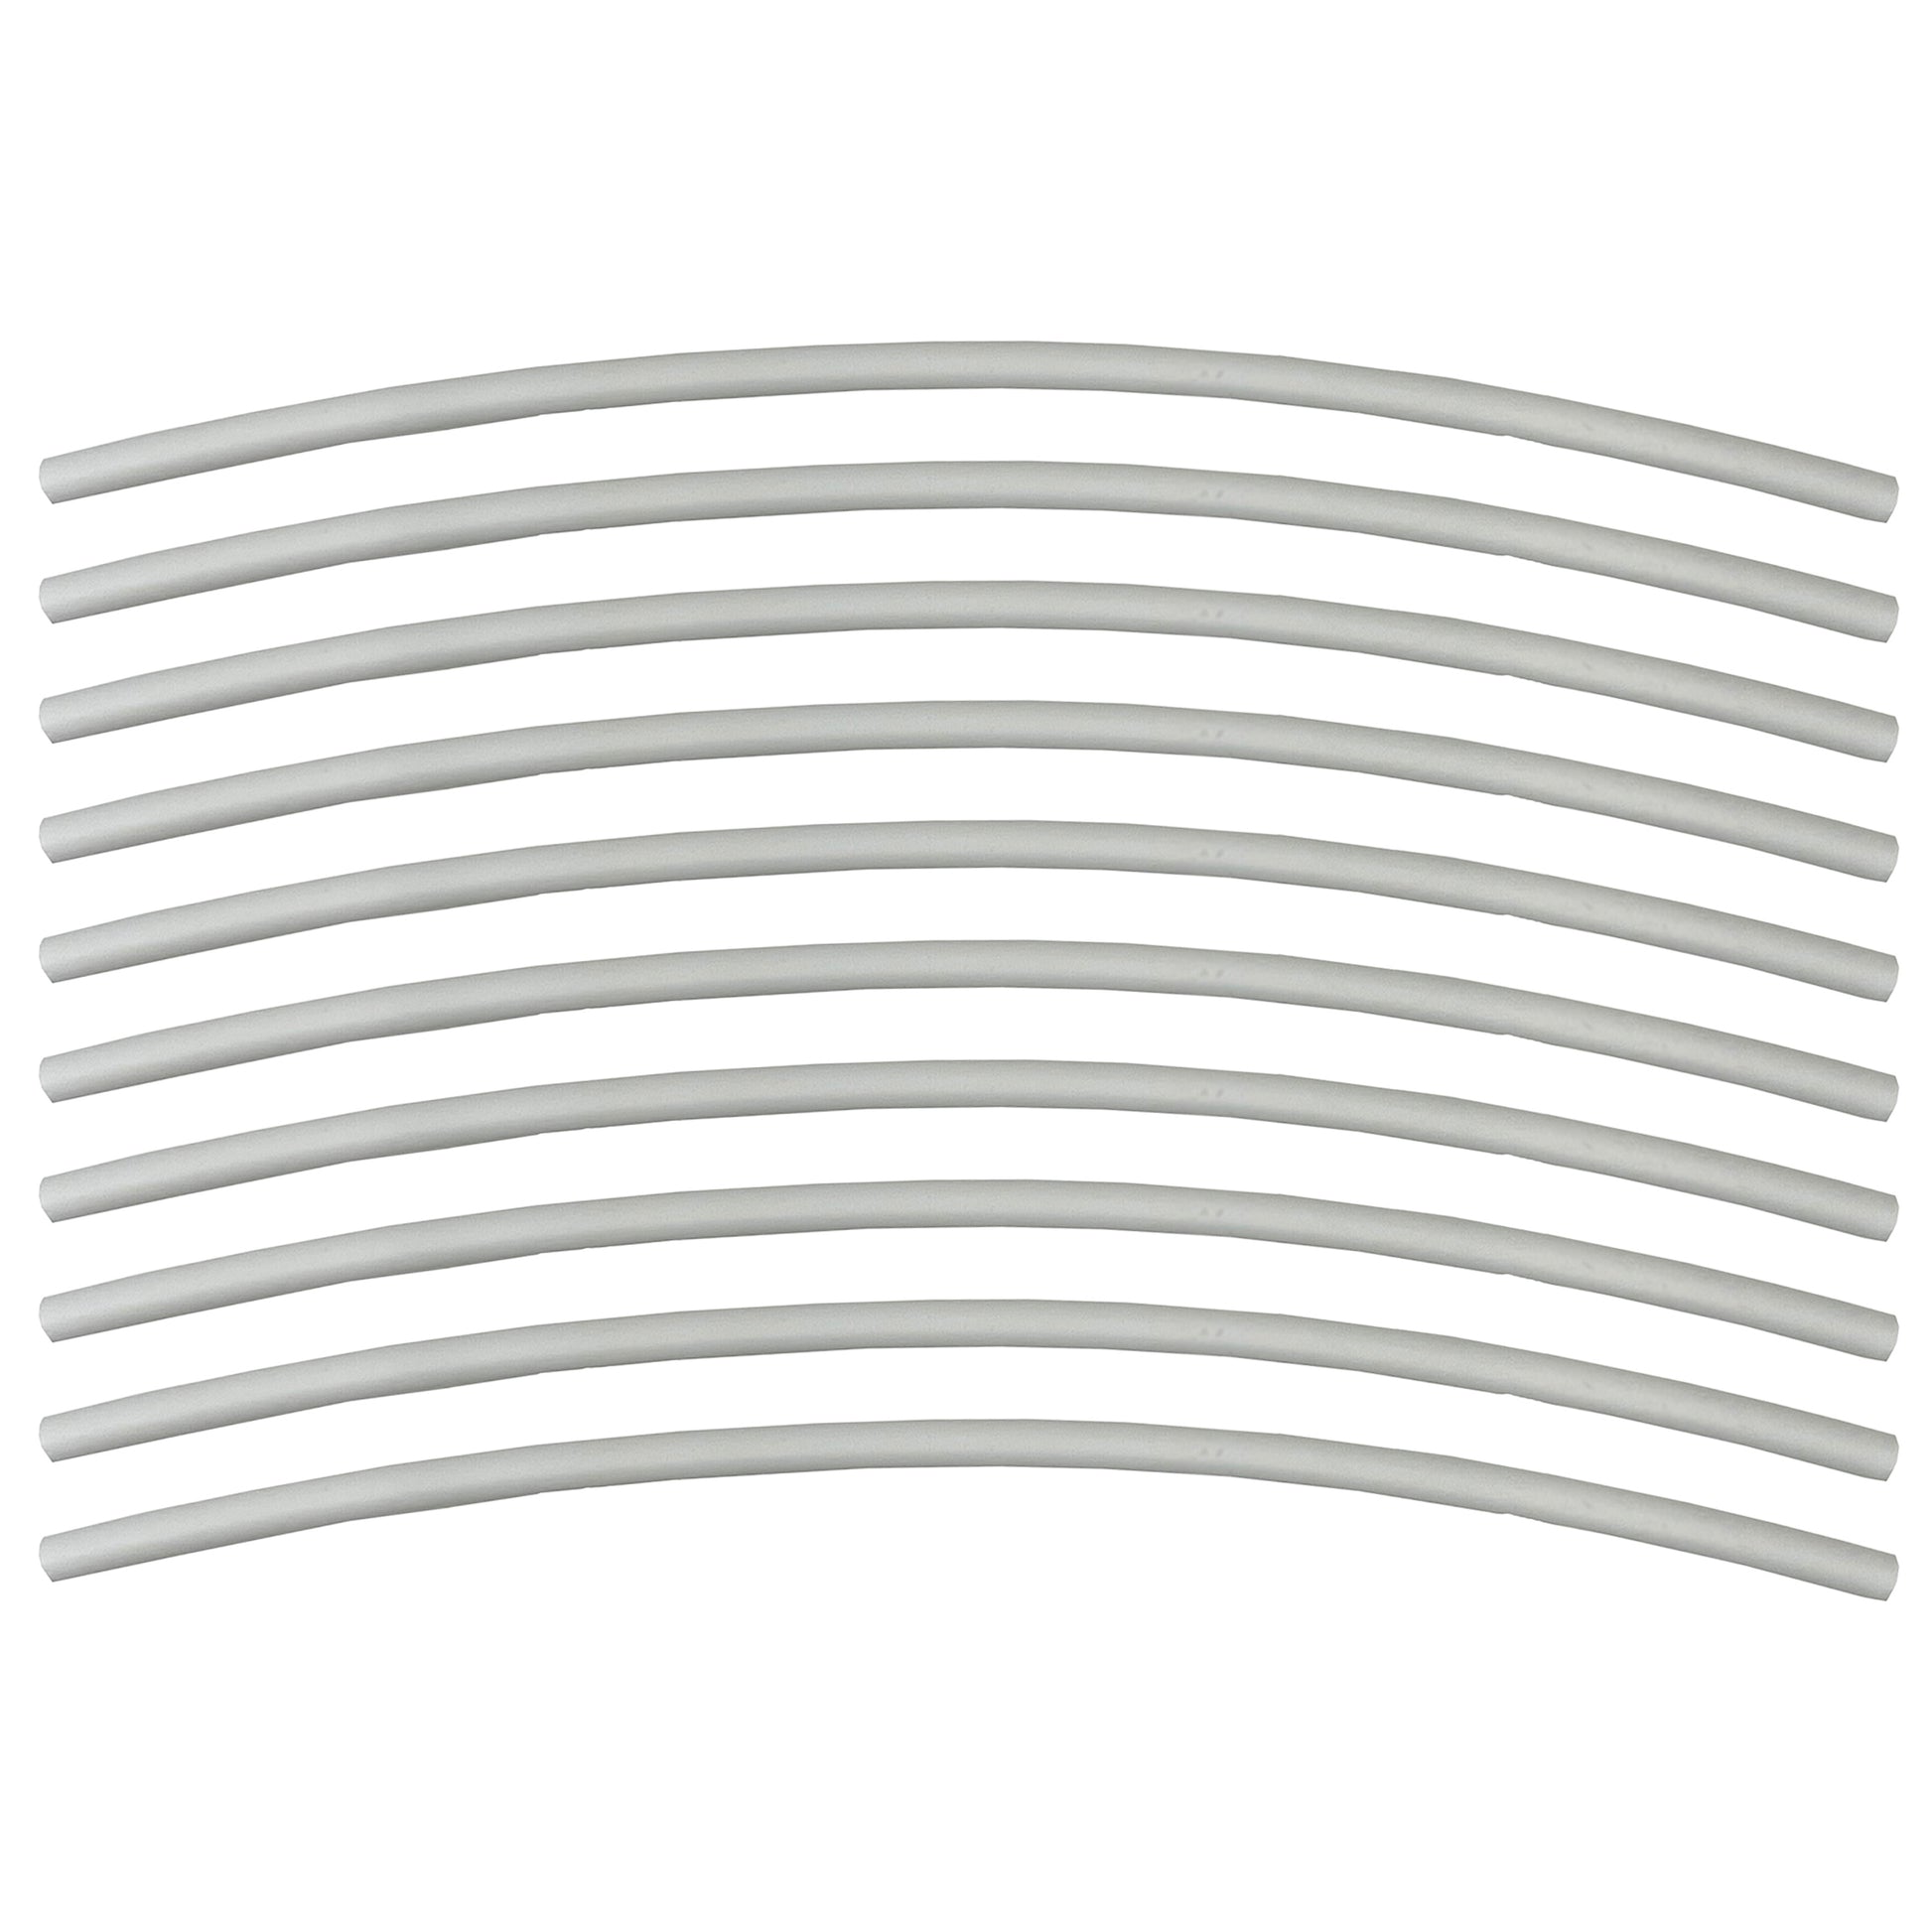 Flexible Thin Single Wall Non-Adhesive Heat Shrink Tubing 2:1 White 1/8" ID - 12" Inch 10 Pack